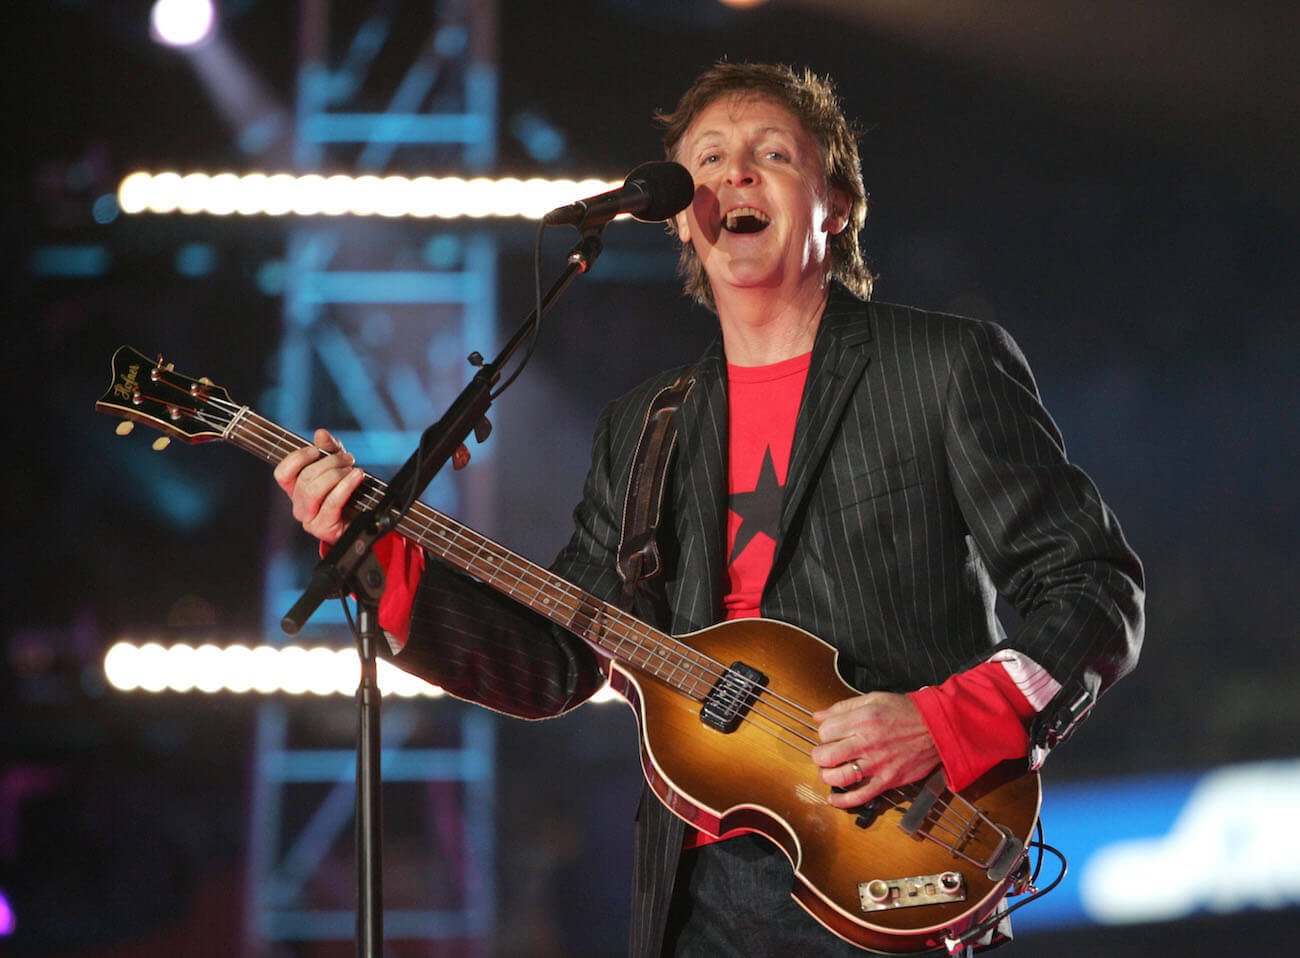 Paul McCartney singing during his Super Bowl Half Time Show in 2005.